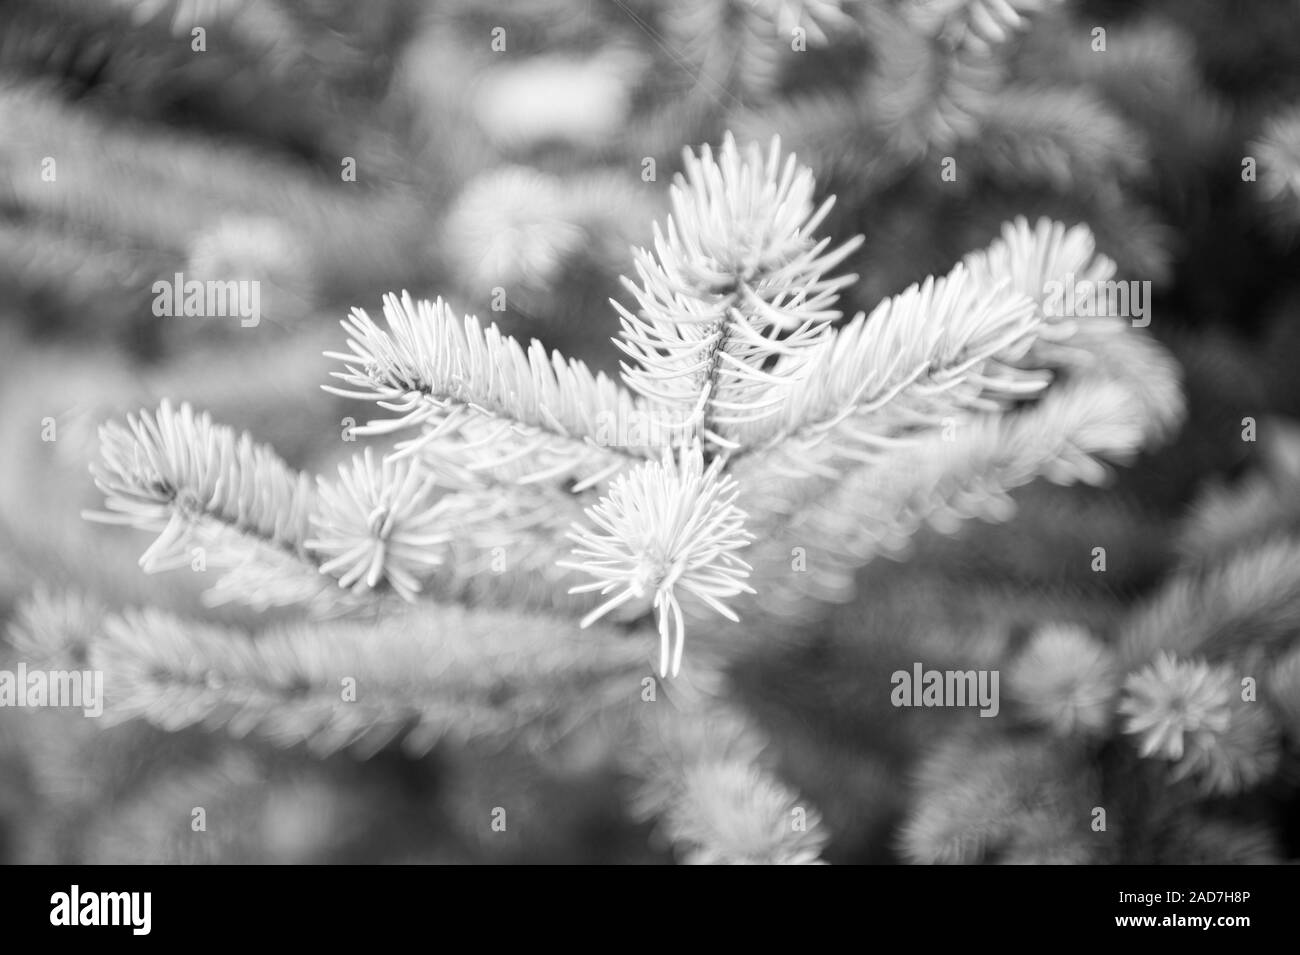 Christmas season is coming. Coniferous evergreen spruce tree. Spruce or conifer plant. Spruce fir or needles on blurred natural background. Branches of pine spruce. Holiday celebration. Stock Photo